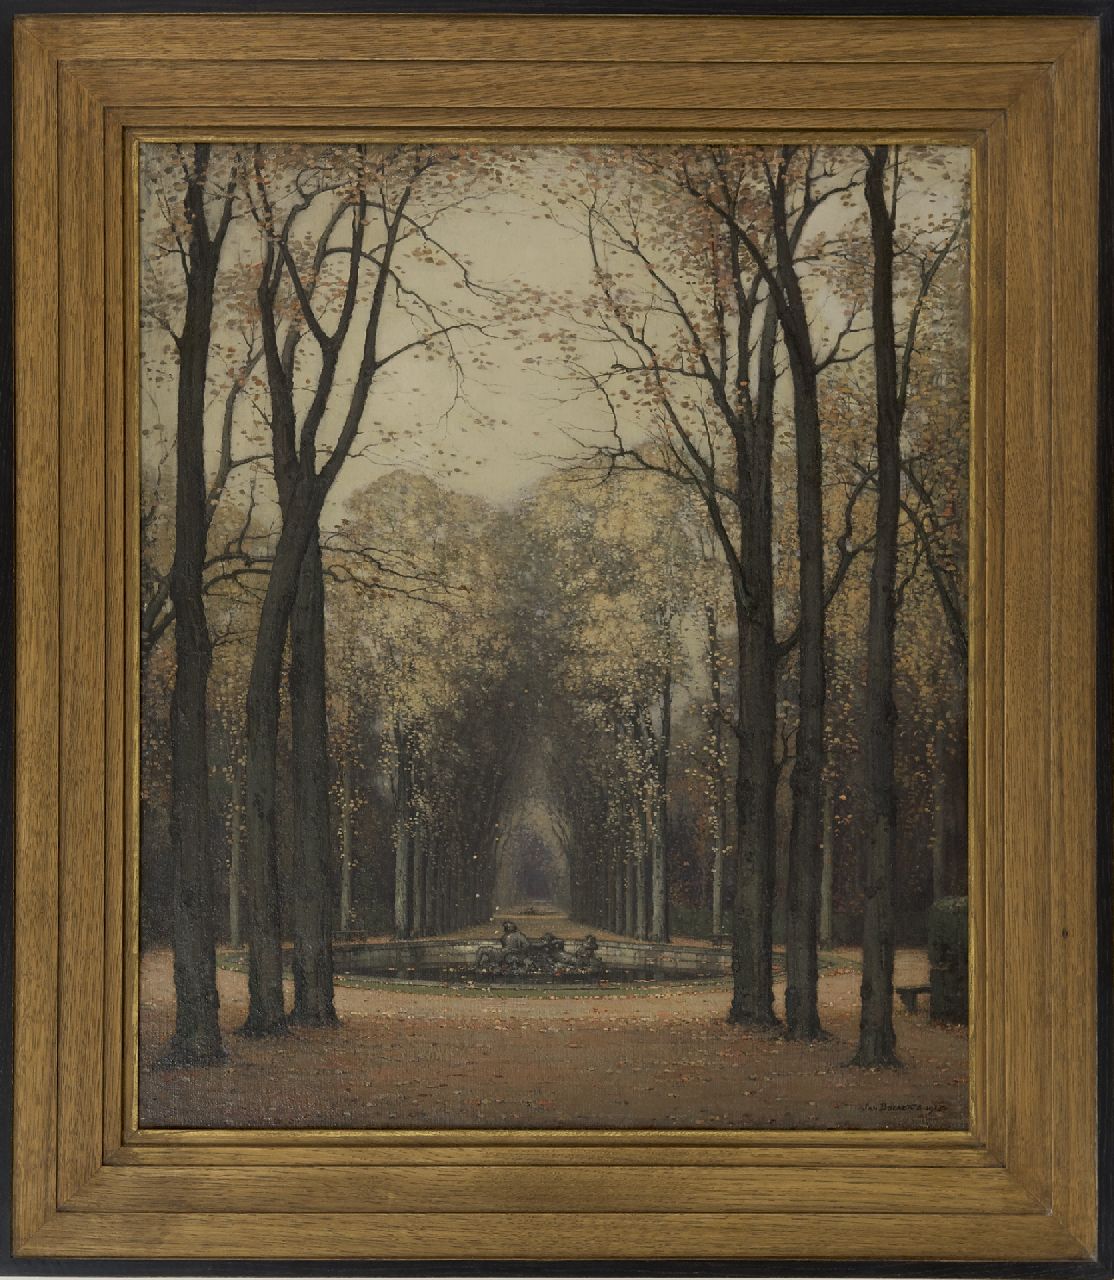 Bogaerts J.J.M.  | Johannes Jacobus Maria 'Jan' Bogaerts | Paintings offered for sale | Autumn at Versailles park, oil on canvas 65.4 x 55.8 cm, signed l.r. and dated 1913